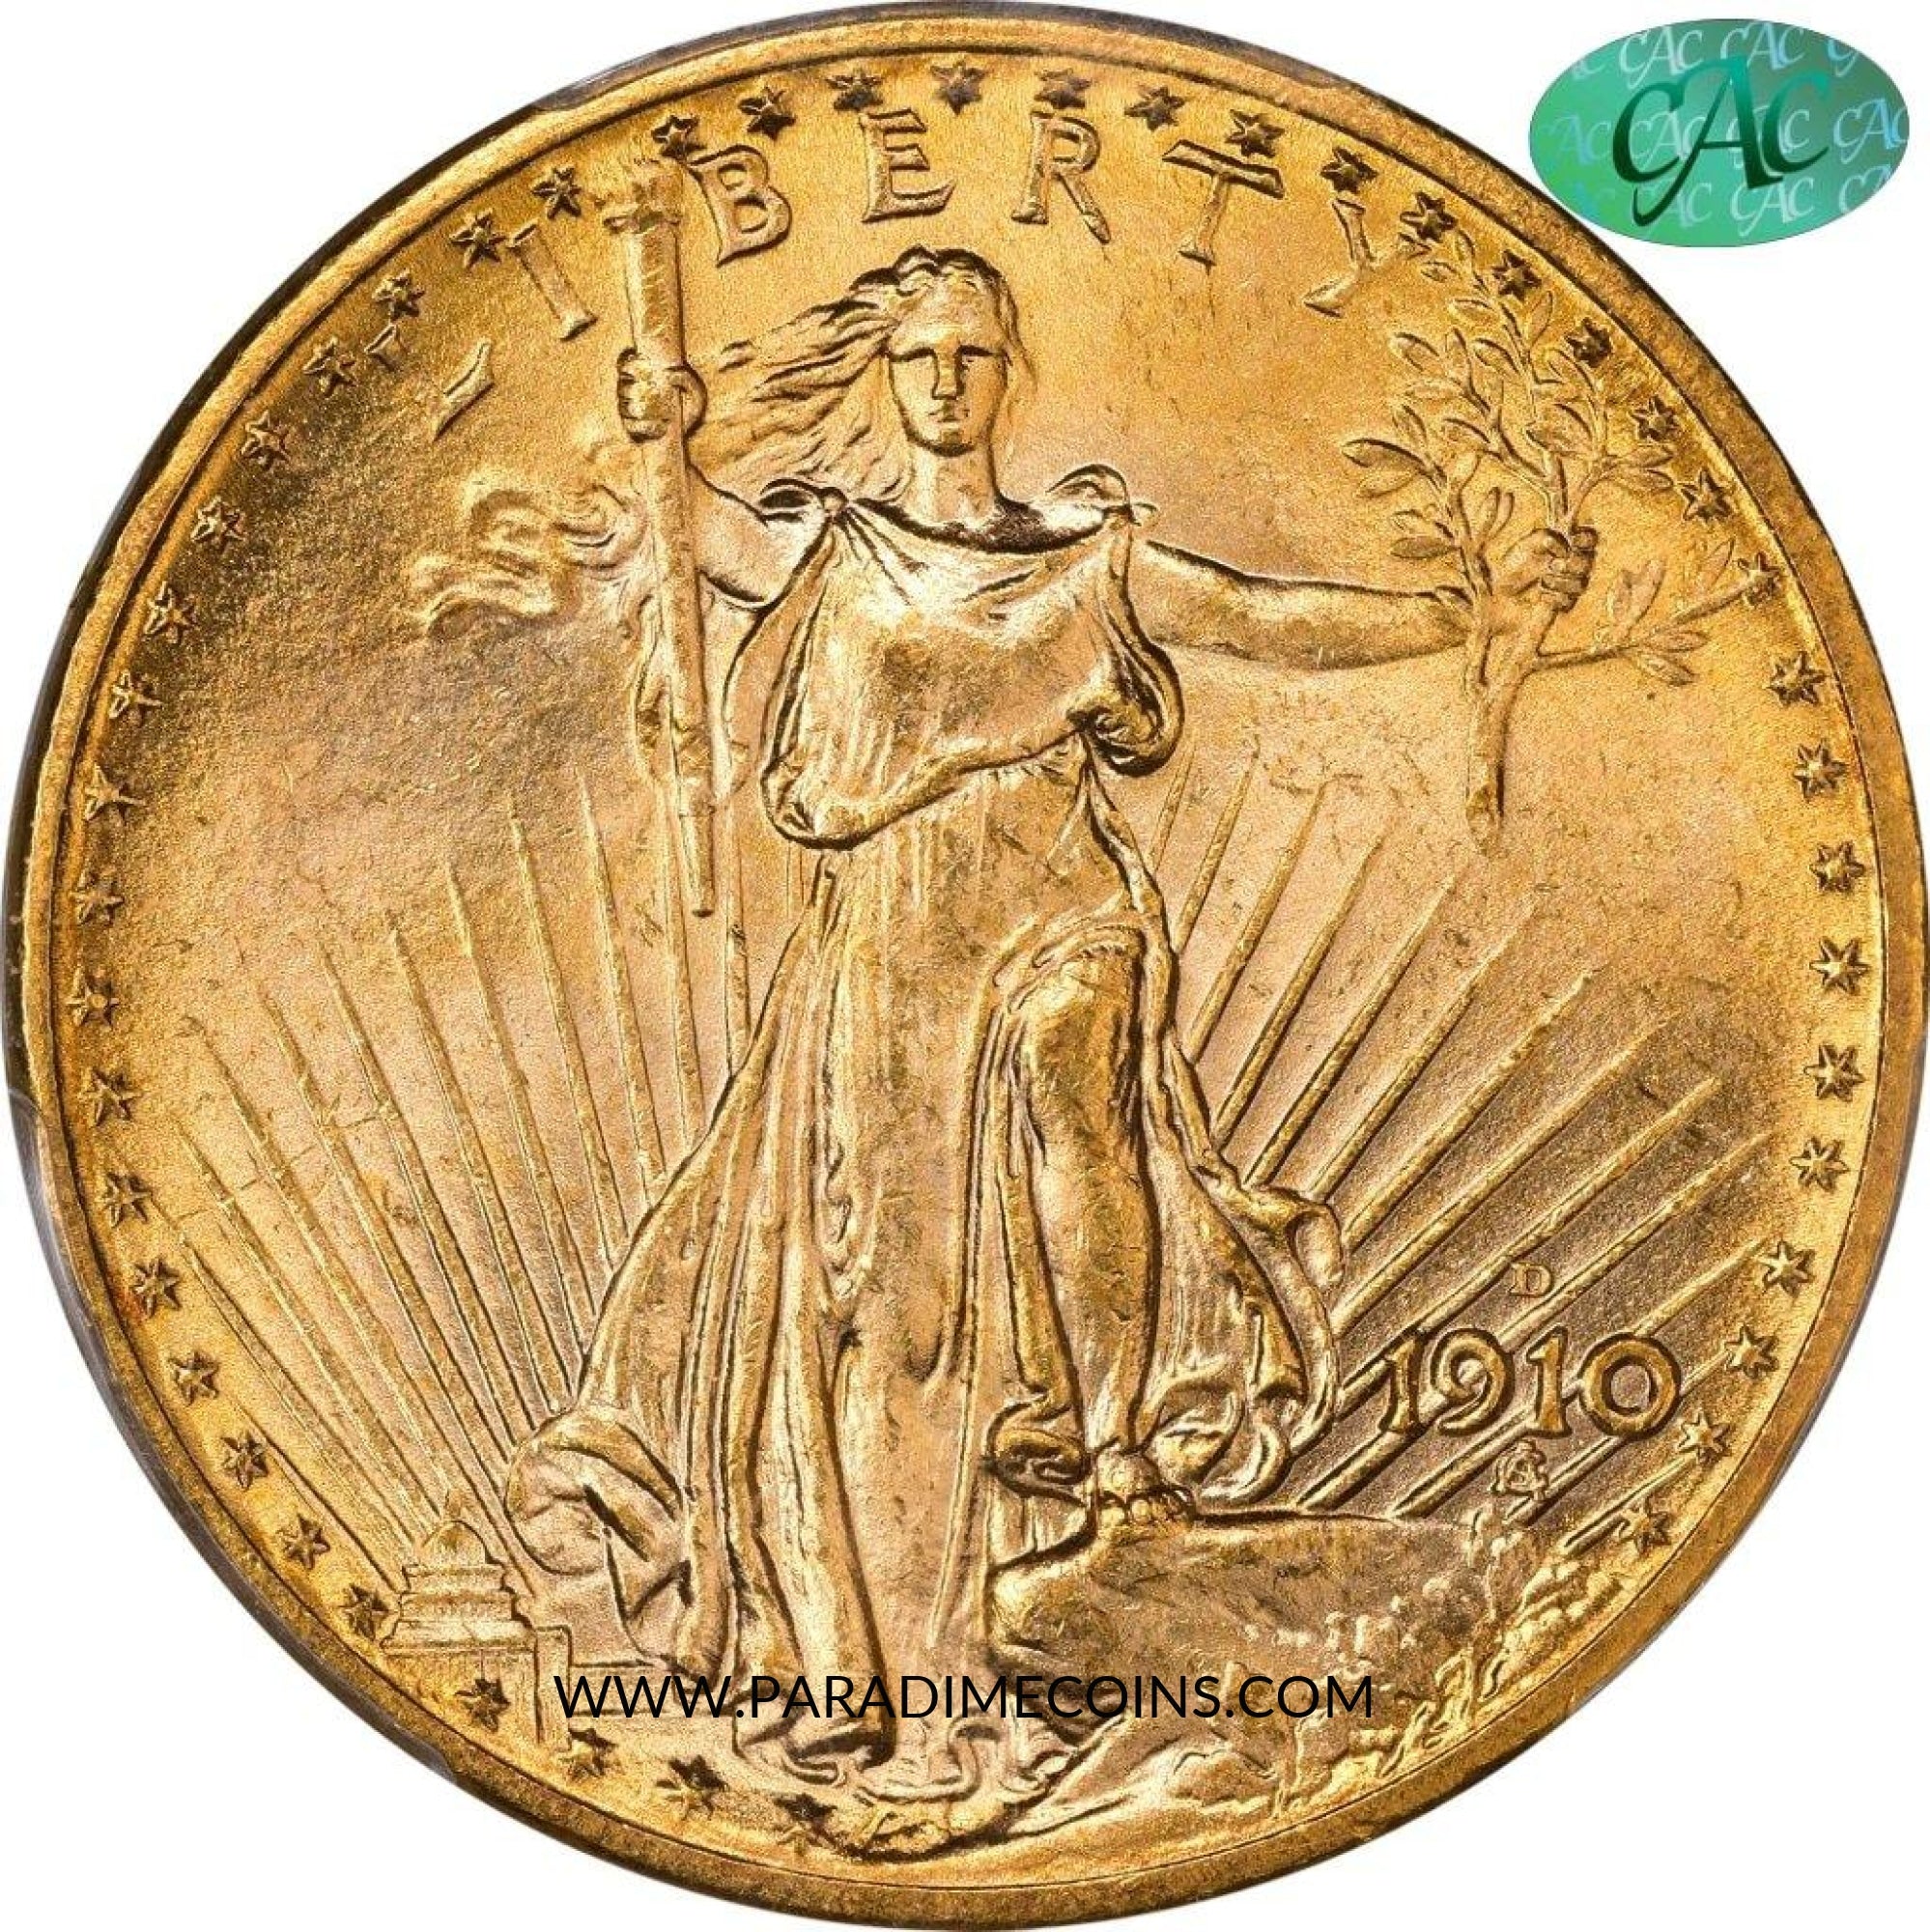 1910-D $20 MS65 PCGS CAC - Paradime Coins | PCGS NGC CACG CAC Rare US Numismatic Coins For Sale